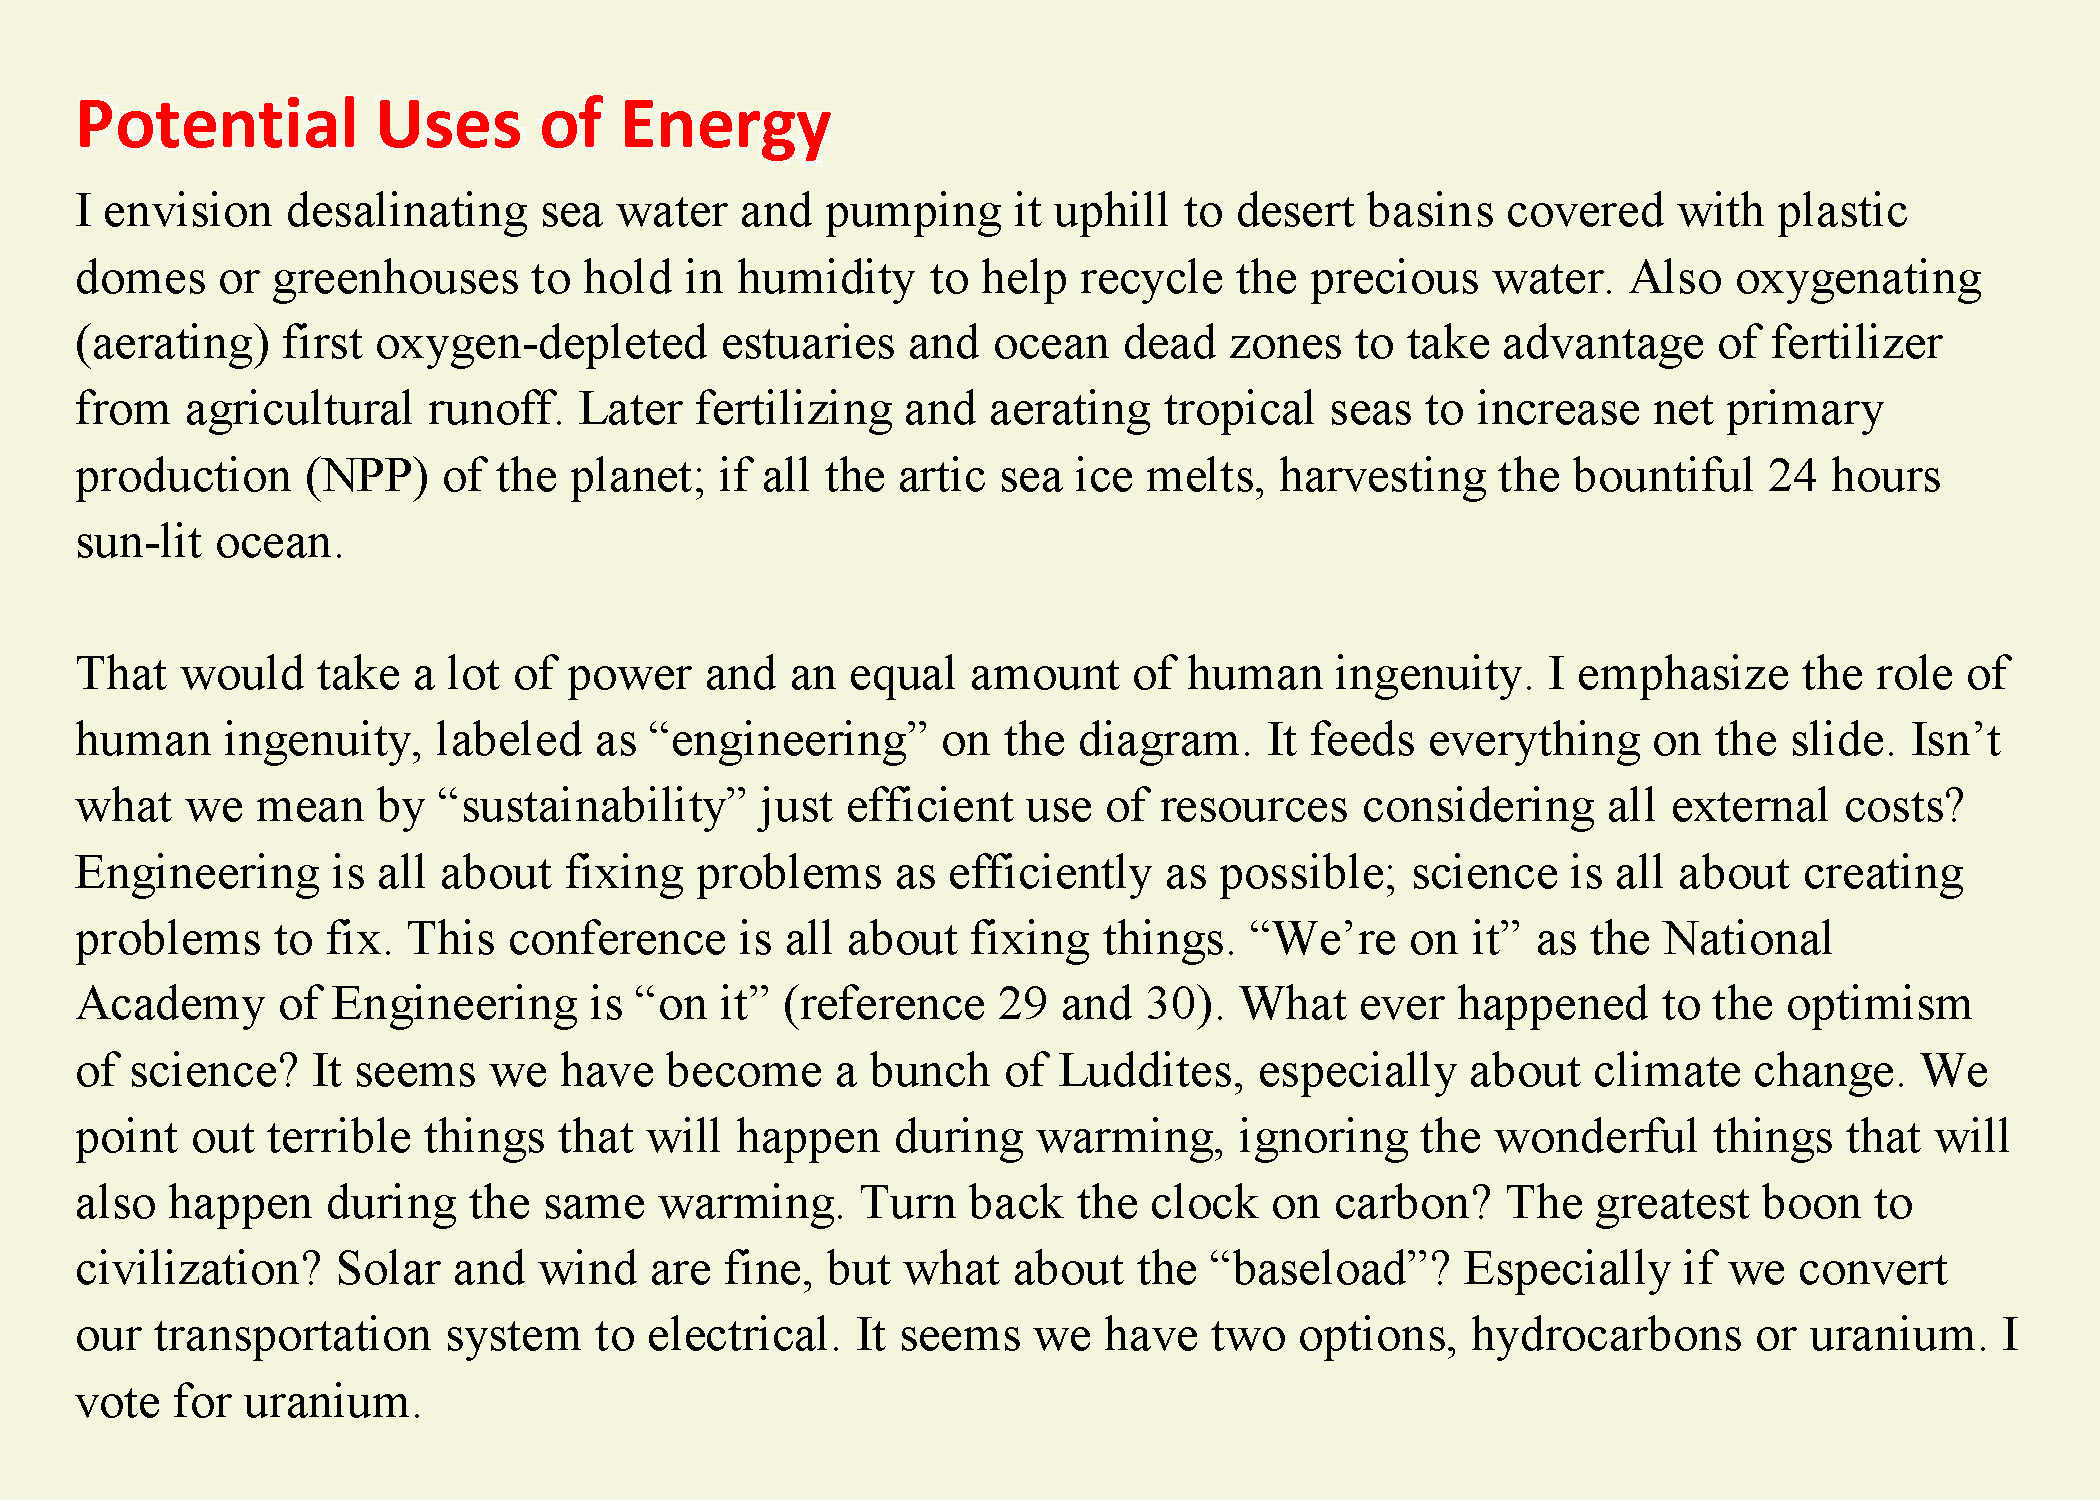 Potential Uses of Energy Text